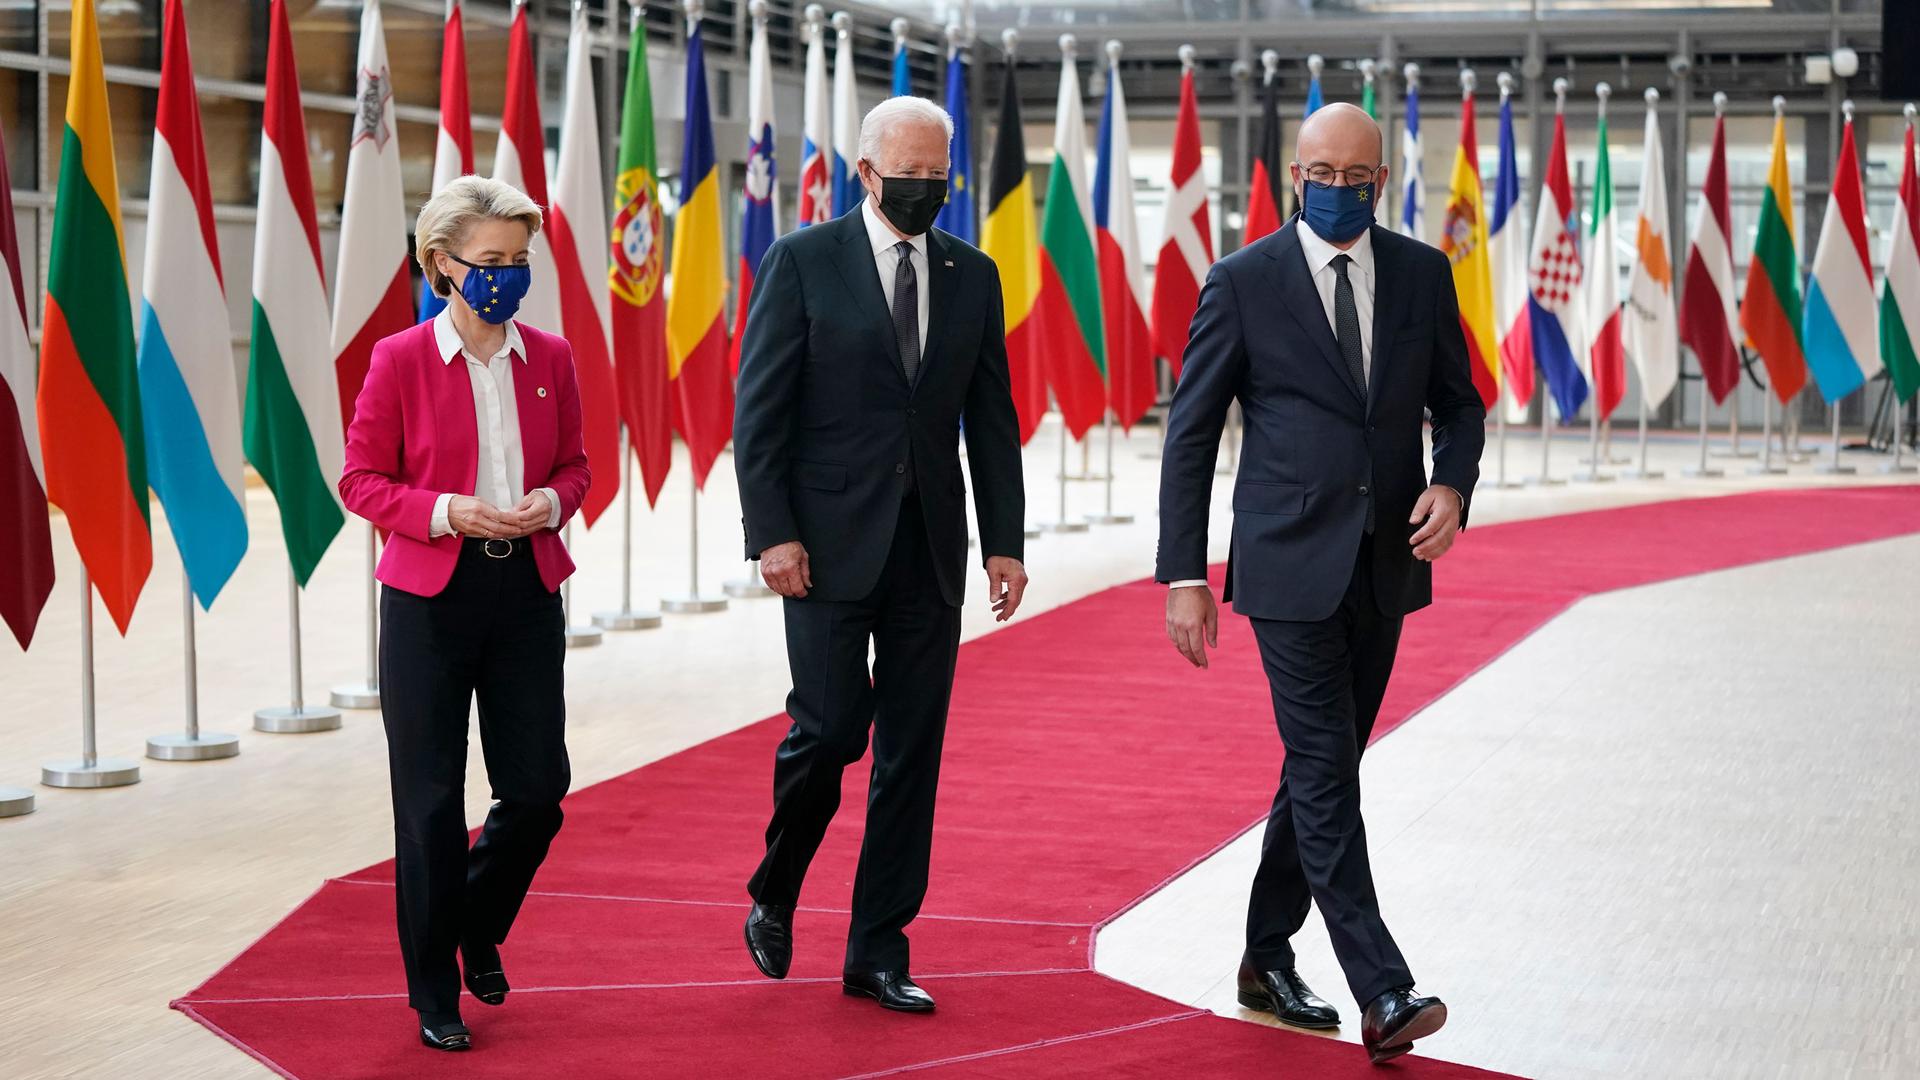 Joe Biden, Charles Michel and Ursula von der Leyen are shown walking side-by-side on a red carpet with several national flags in the background.